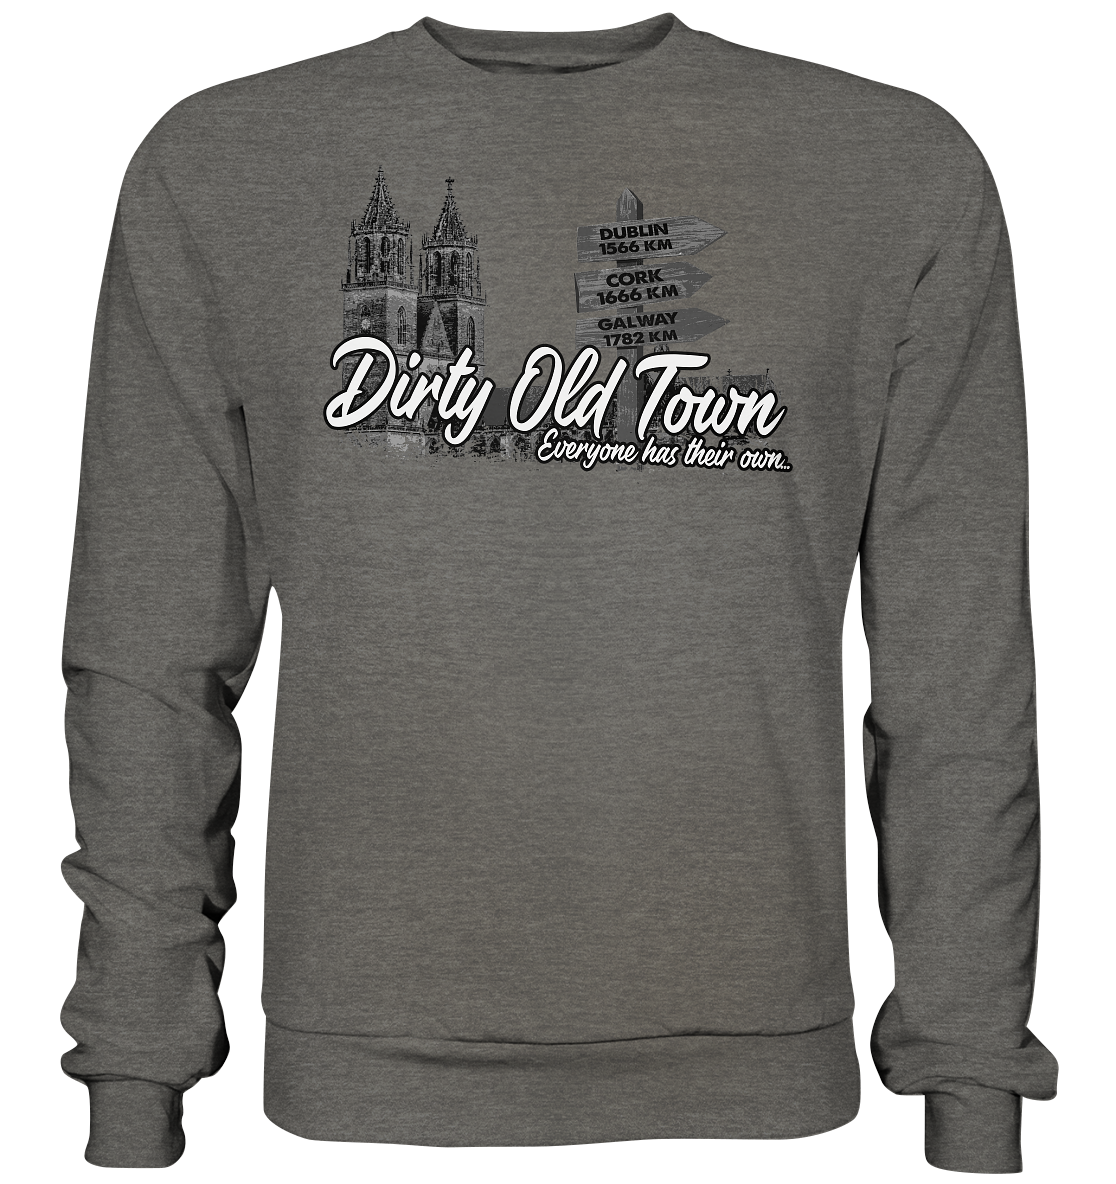 Dirty Old Town "Everyone Has Their Own" (Magdeburg) - Basic Sweatshirt